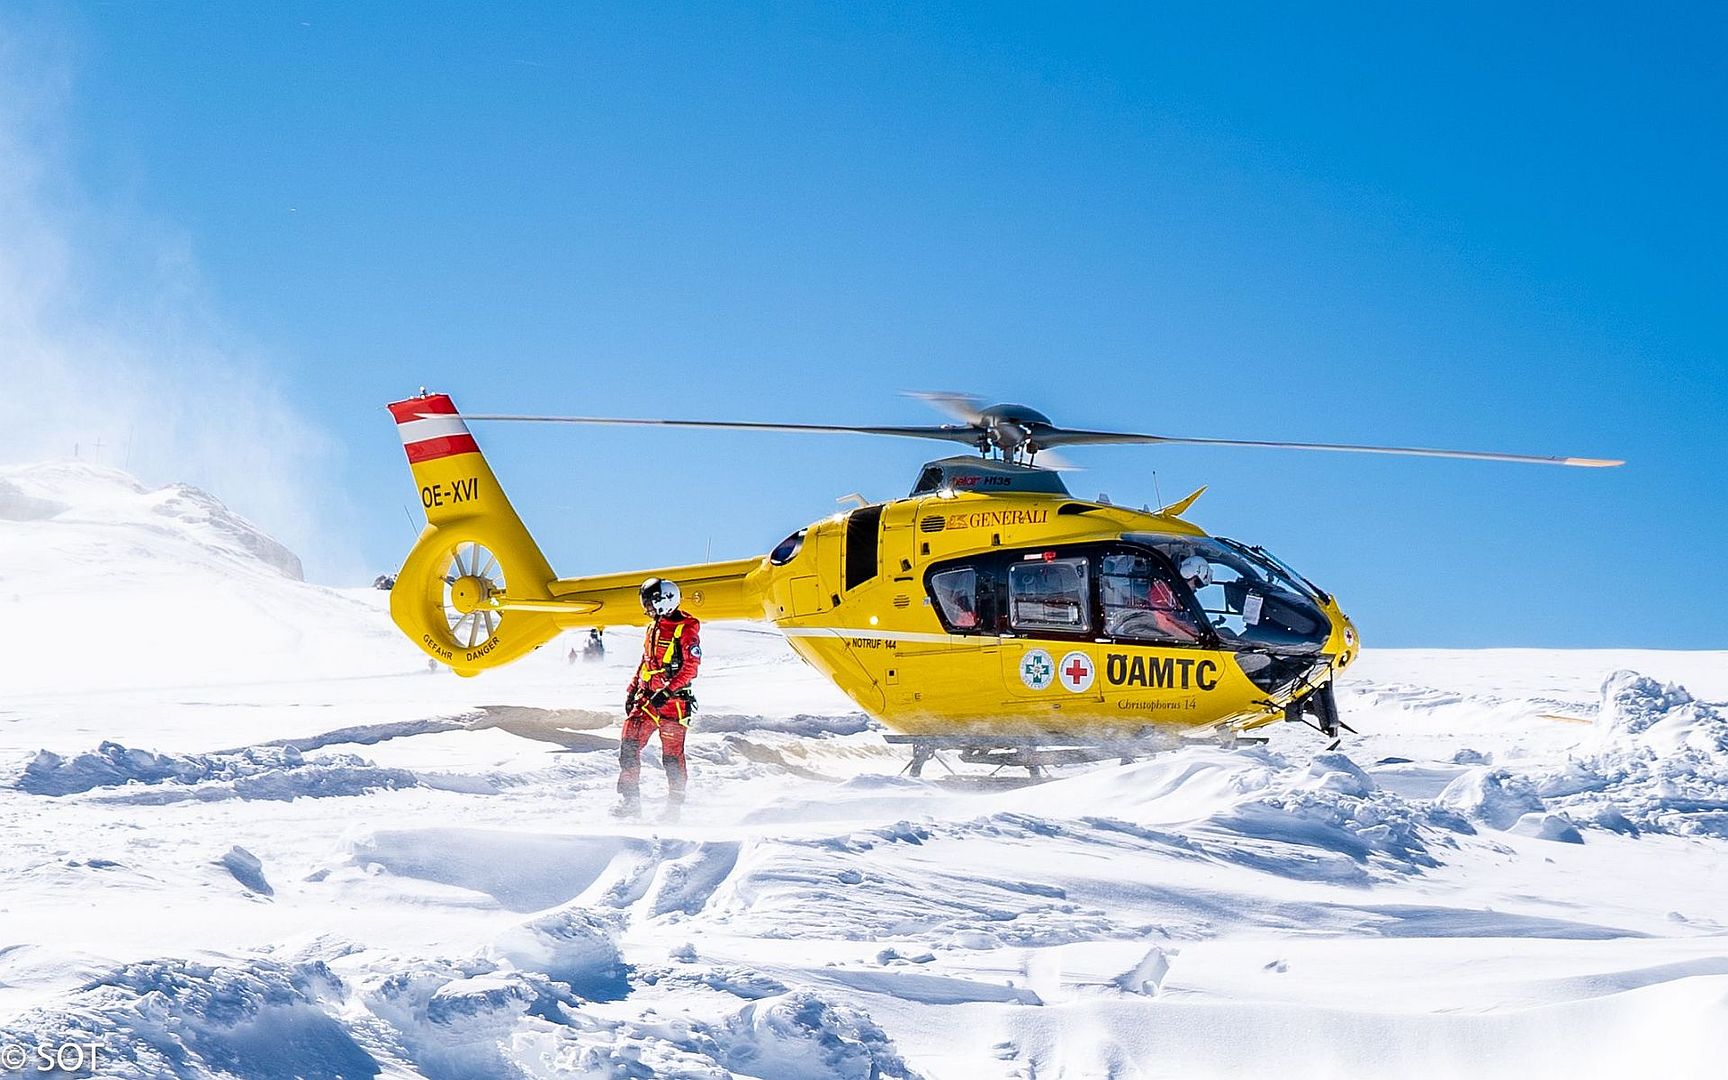  AMTC Air Rescue Starts Fleet Modernization With Five Airbus H135 Helicopters